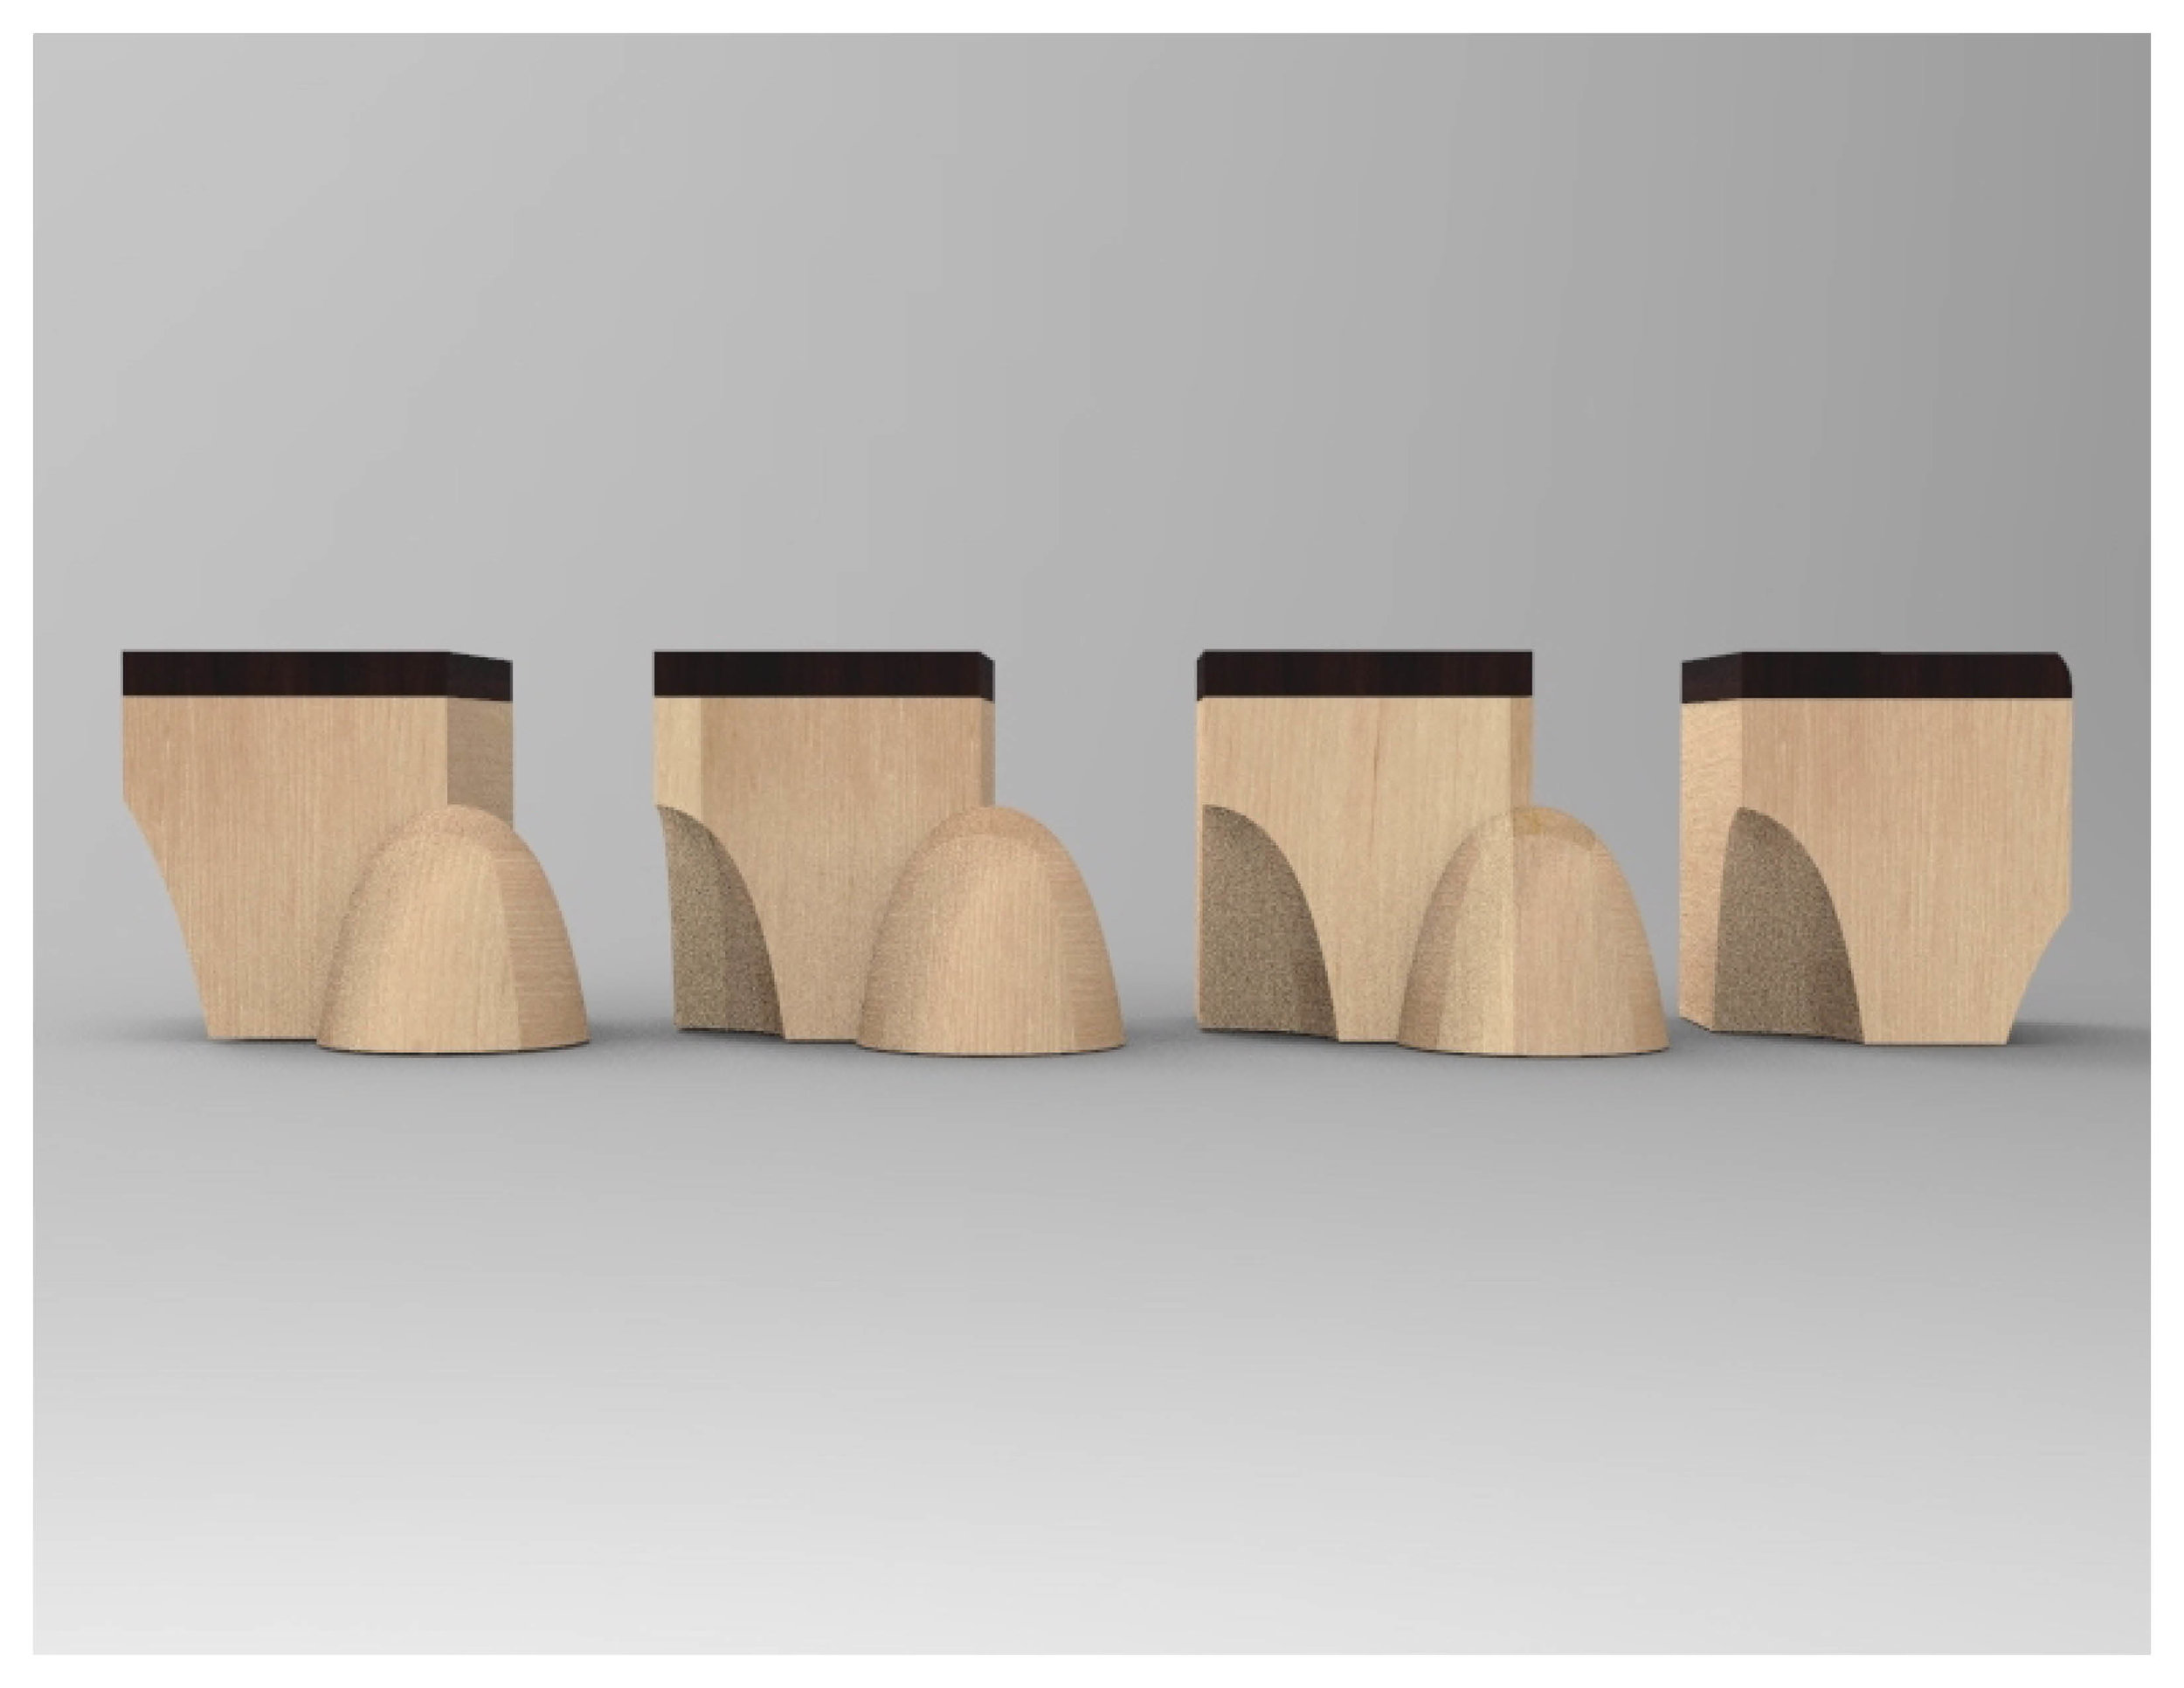 Stool Concept 2A: Frontal View (Deconstructed)